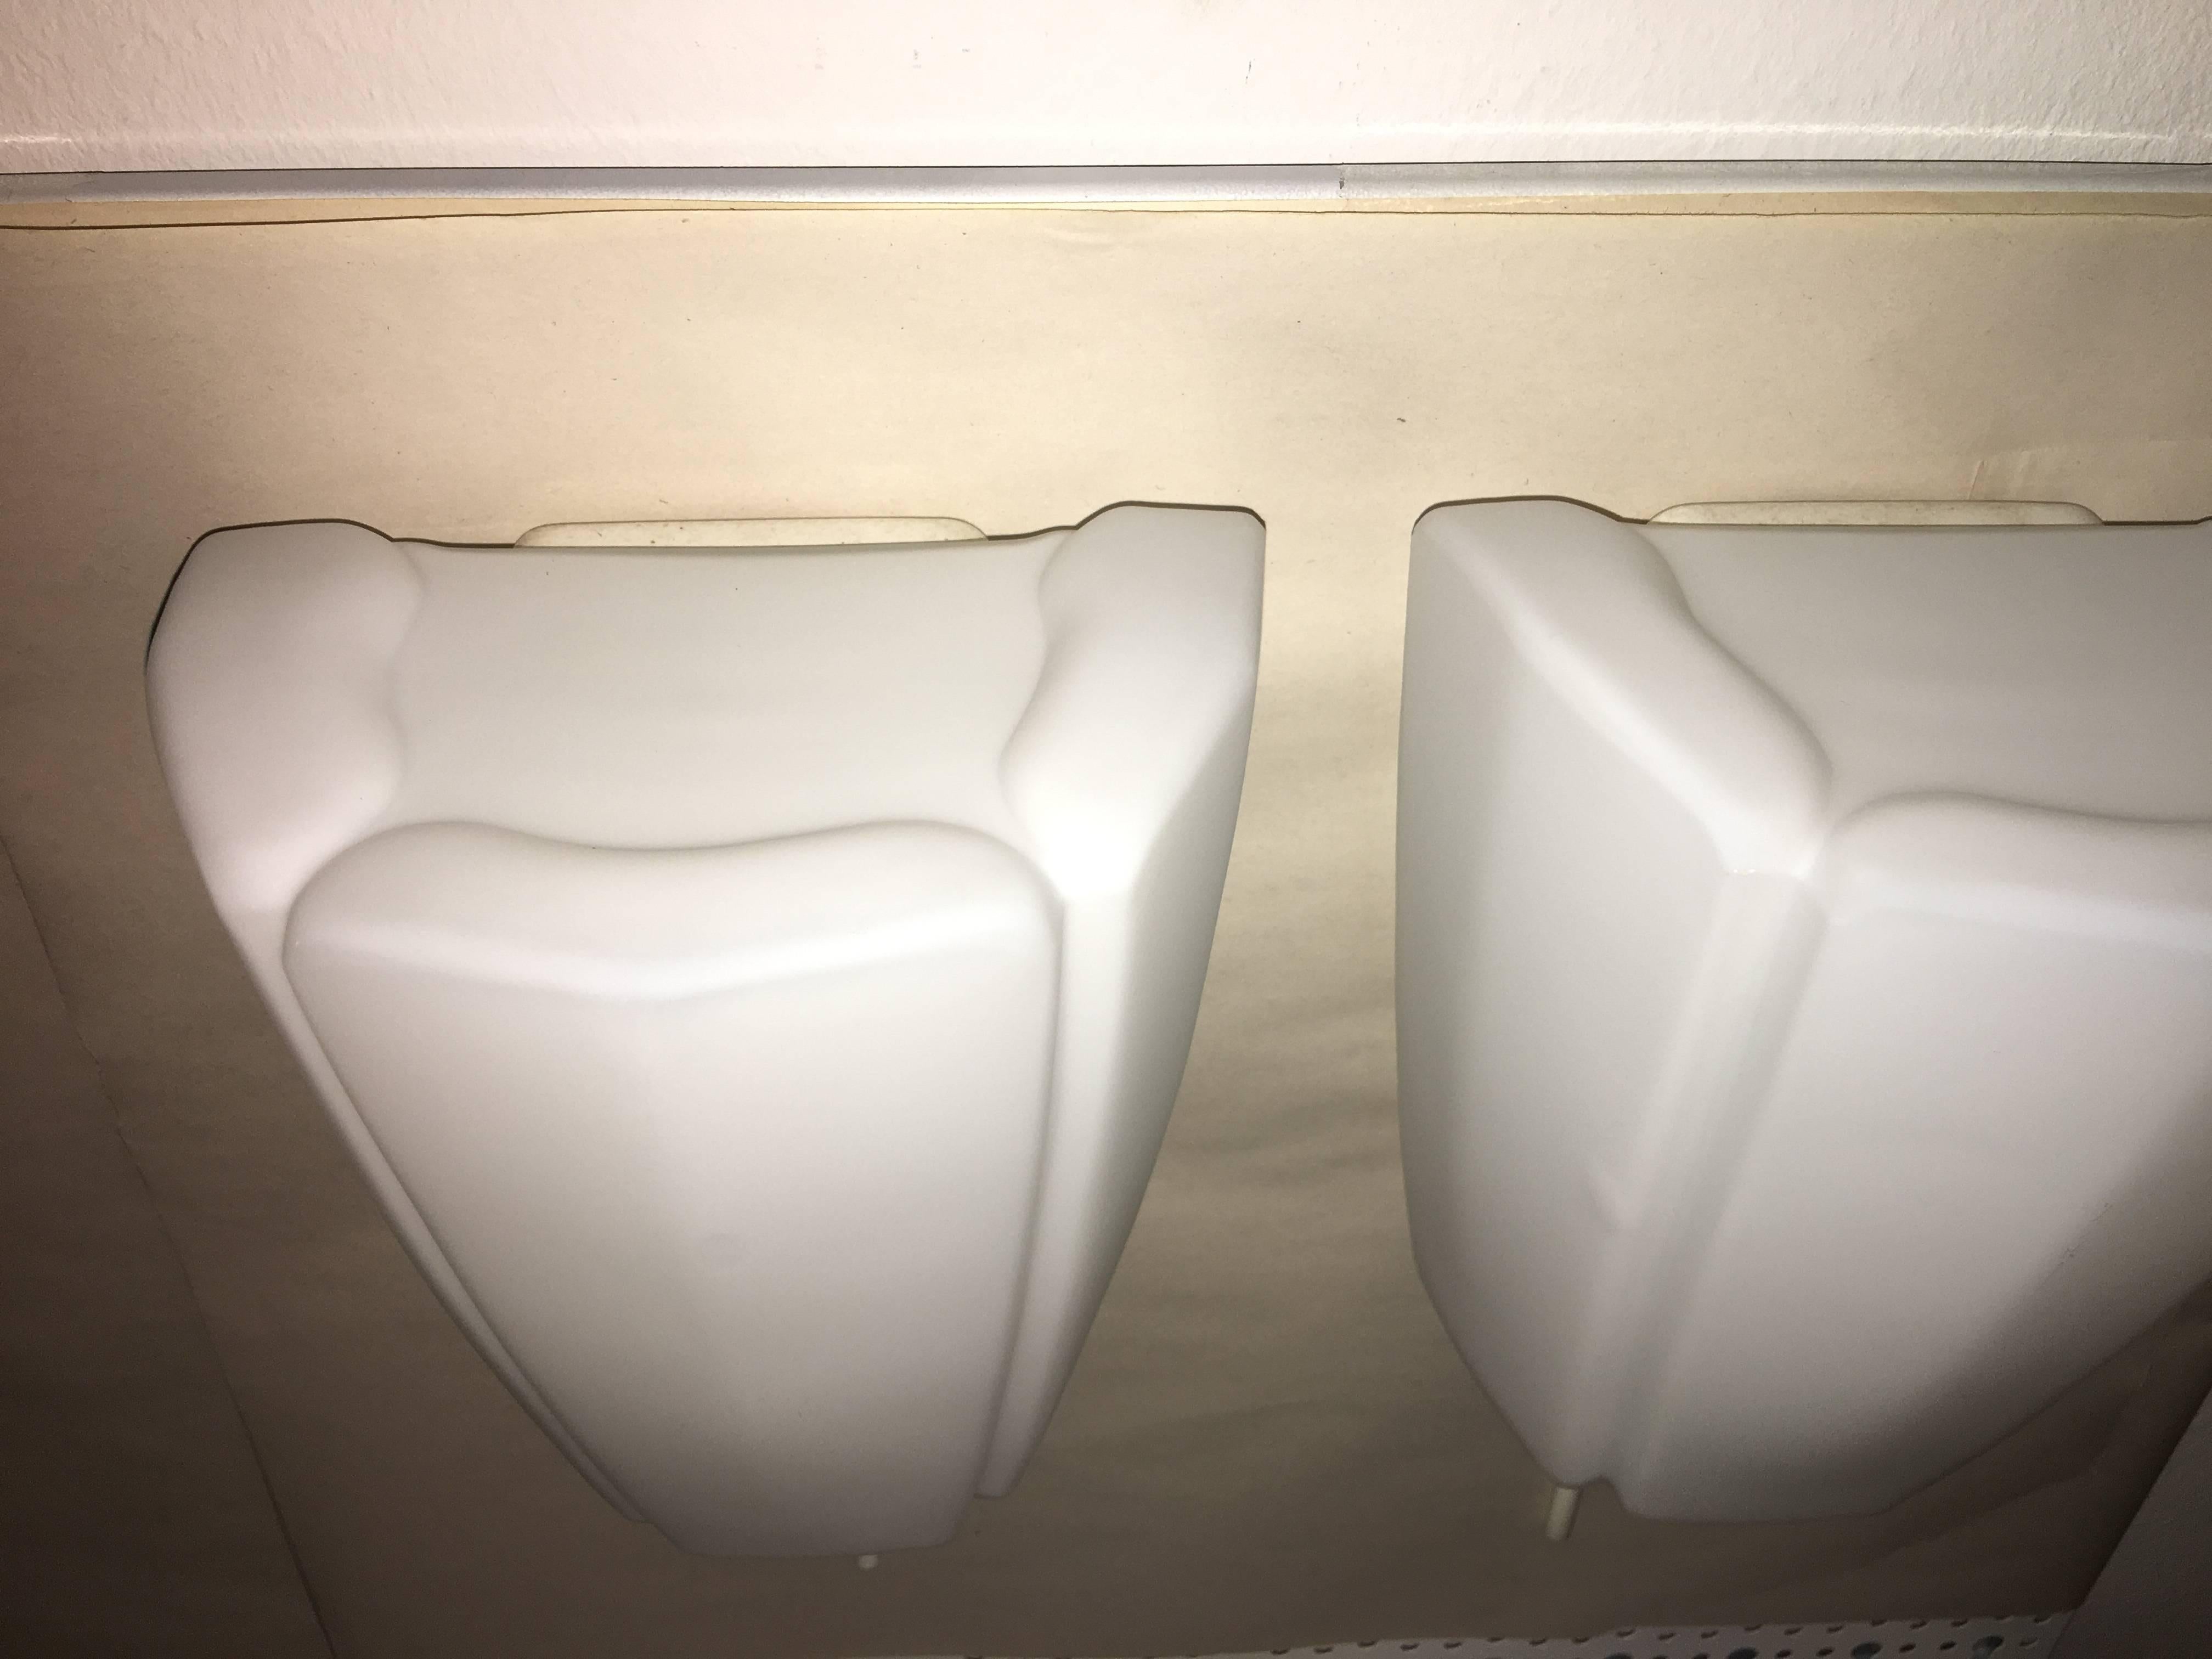 Pair of 1960s Milk Glass Sconces by Limburg Germany - 2 pair available In Good Condition For Sale In Frisco, TX